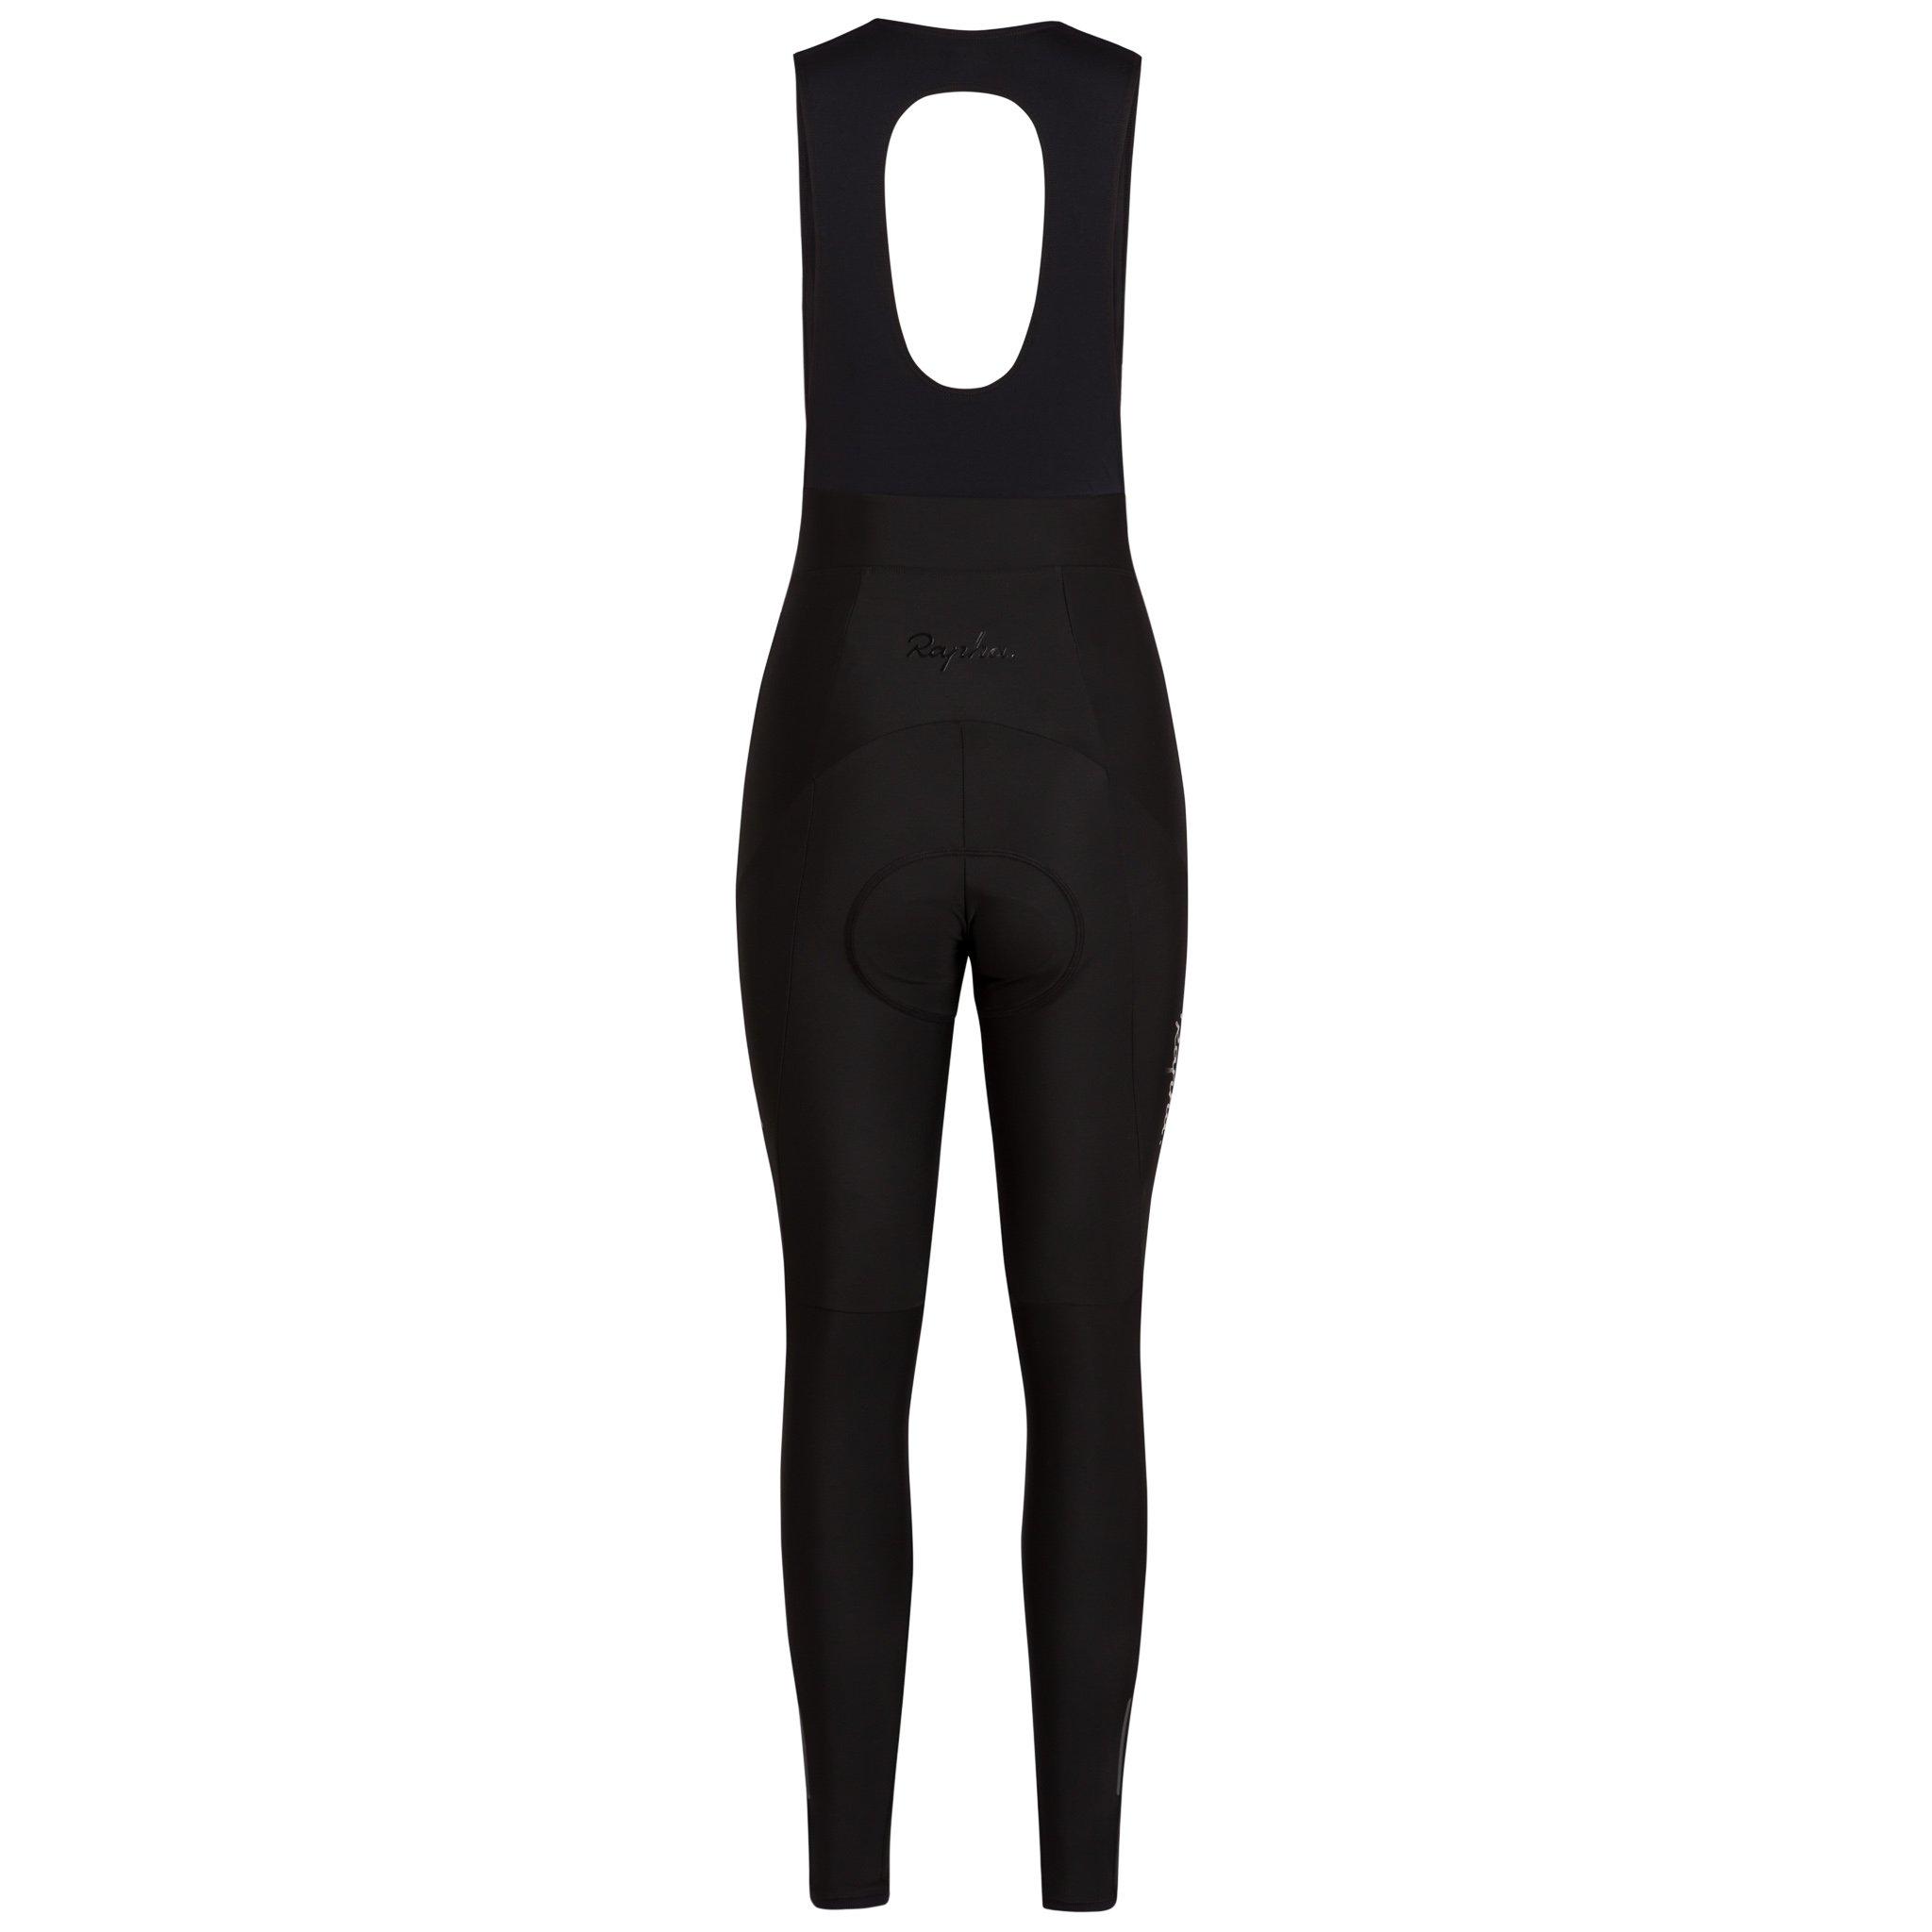 RedWhite Apparel Women's Long Distance Winter Cycling Bib Tights with Pad